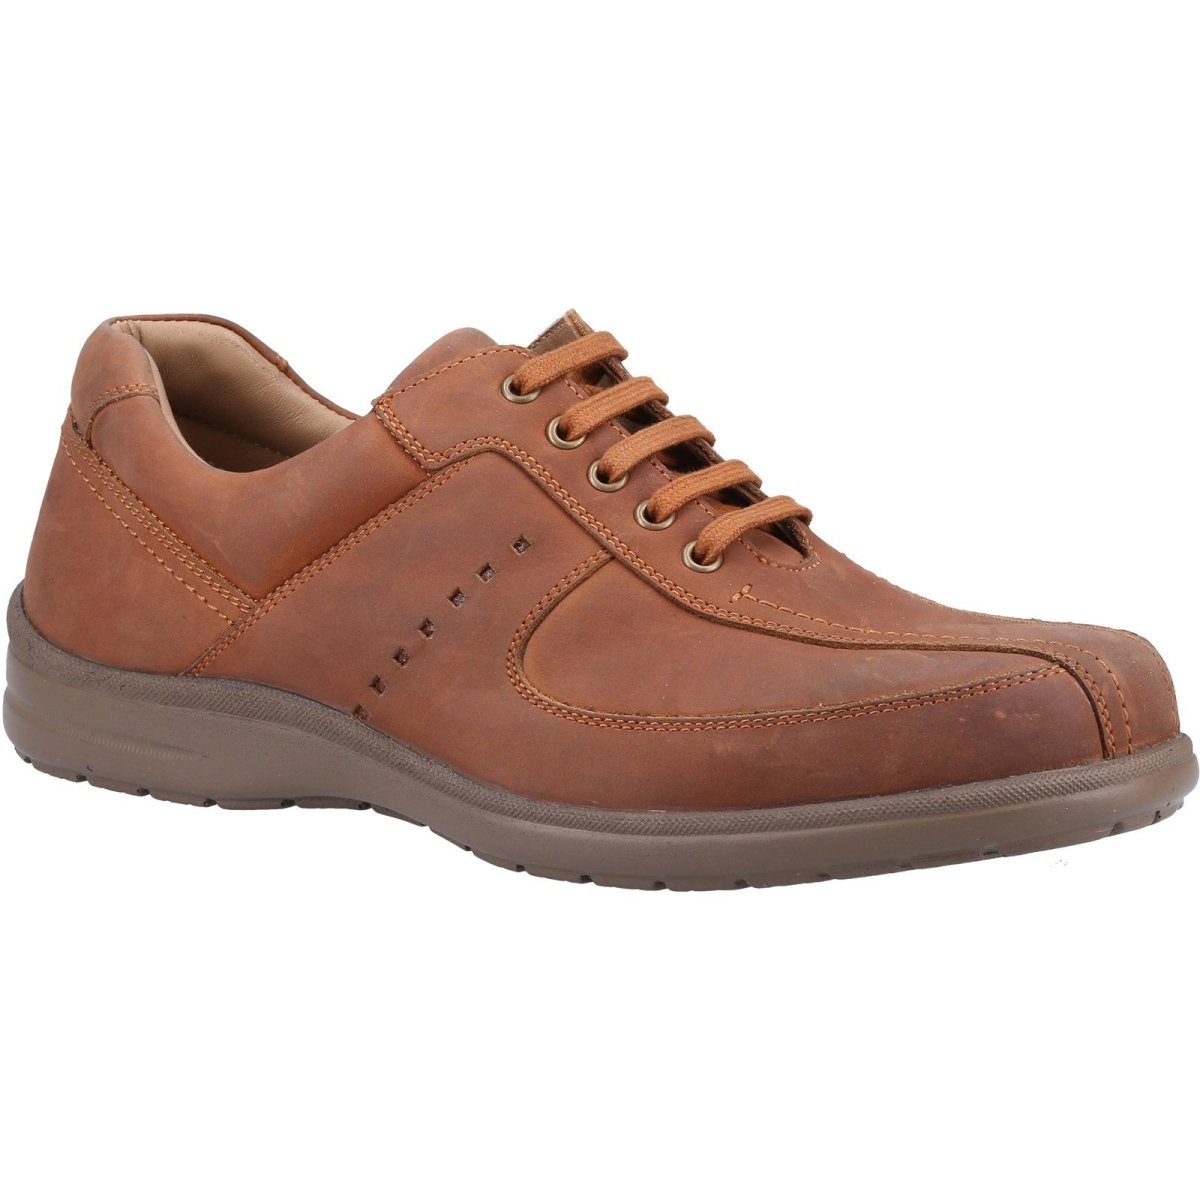 Fleet & Foster Bob Mens Smooth Leather Casual Shoes - Shoe Store Direct